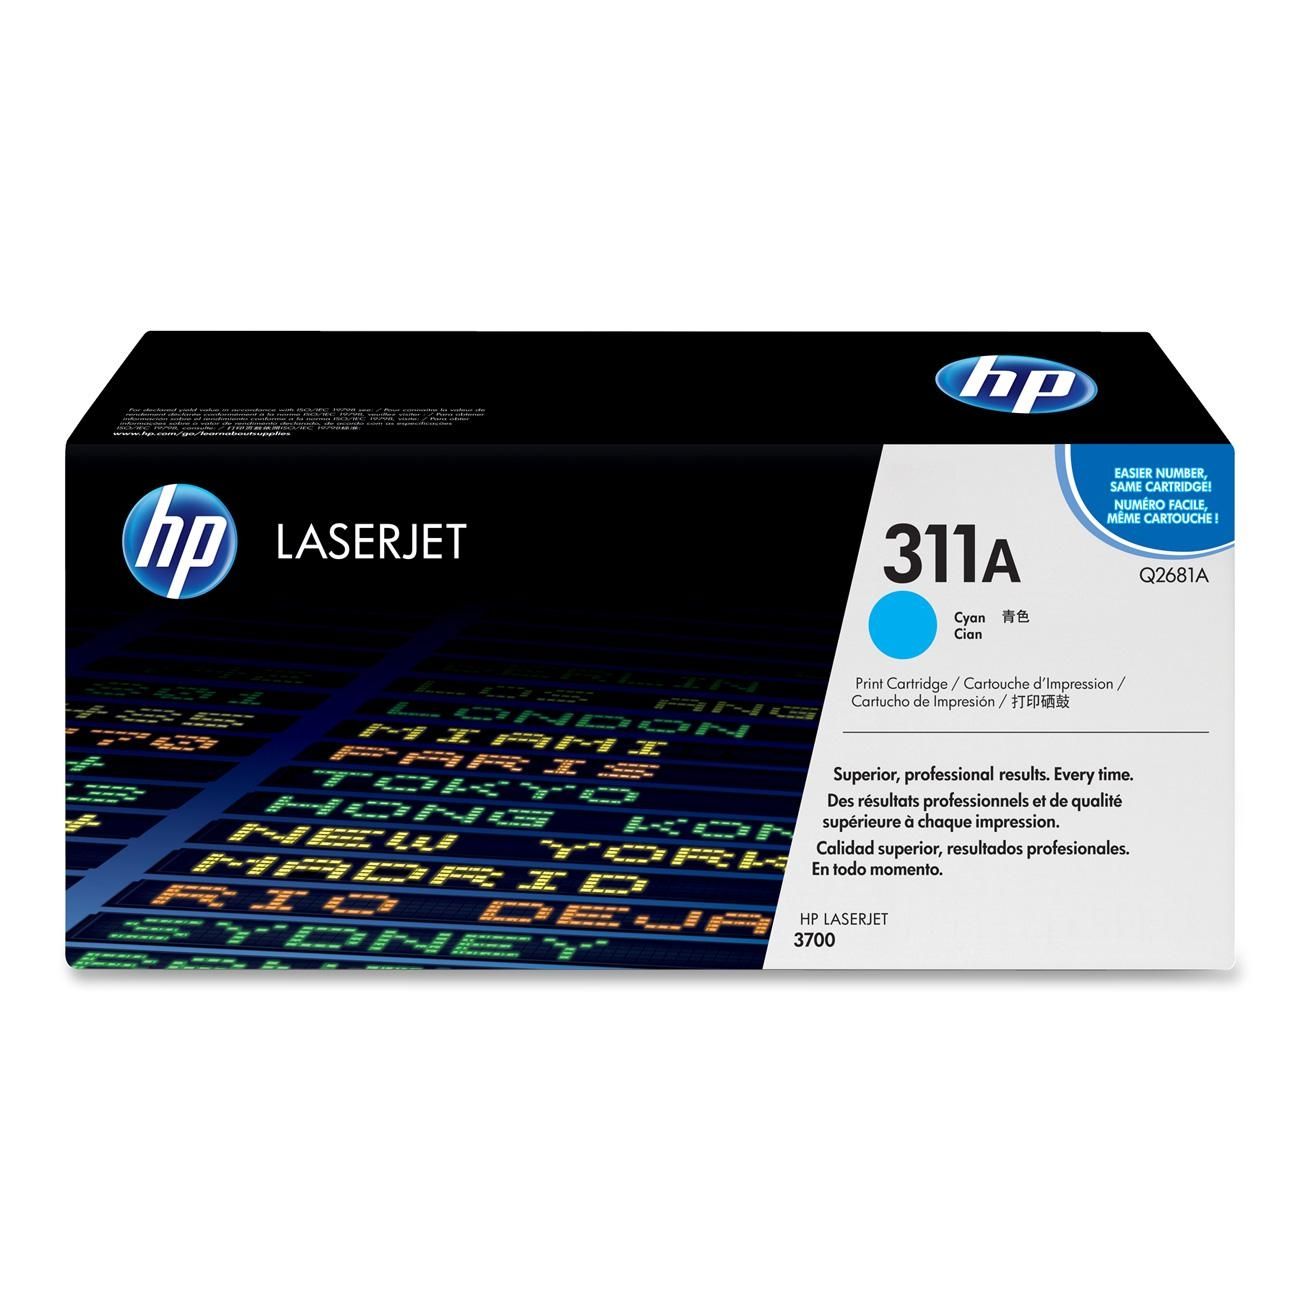 Related to HP 3700DN: Q2681A